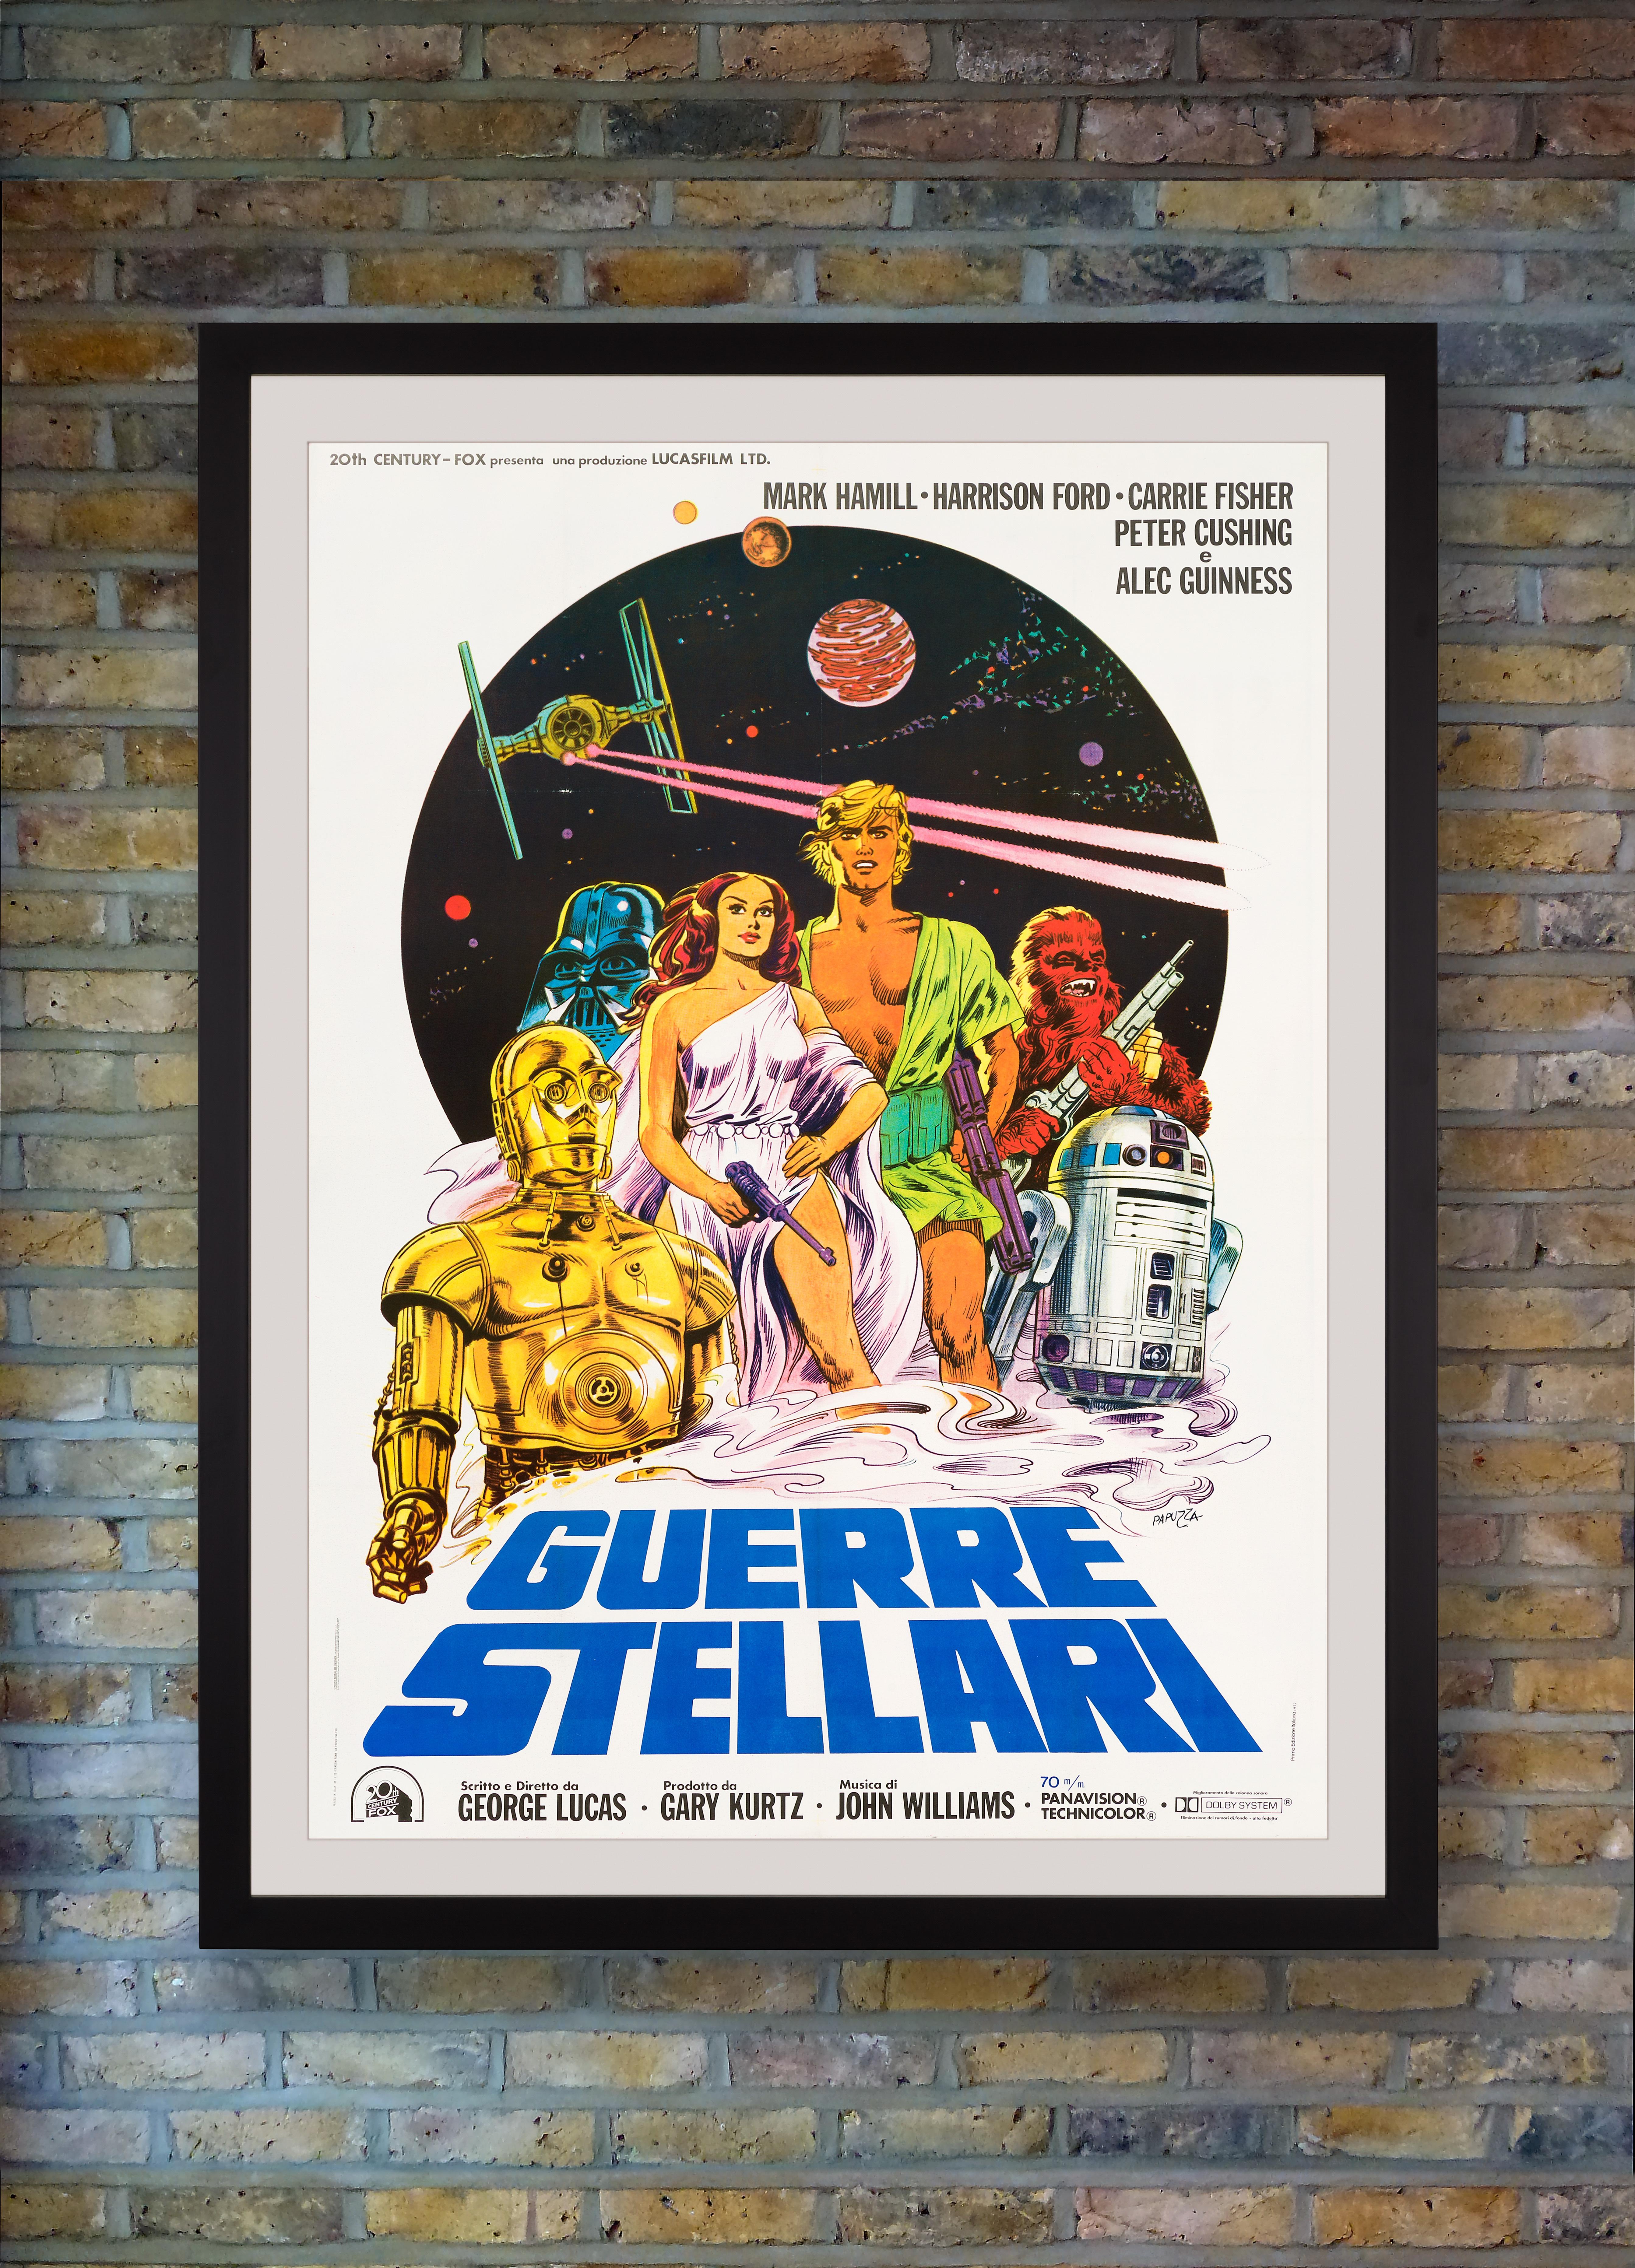 Although the illustrations of Luke Skywalker and Princess Leia bear no resemblance to actors Mark Hamill and Carrie Fisher and appear to be clothed in ancient Roman robes, this distinctive Italian Due Fogli poster is, in our opinion, one of the most